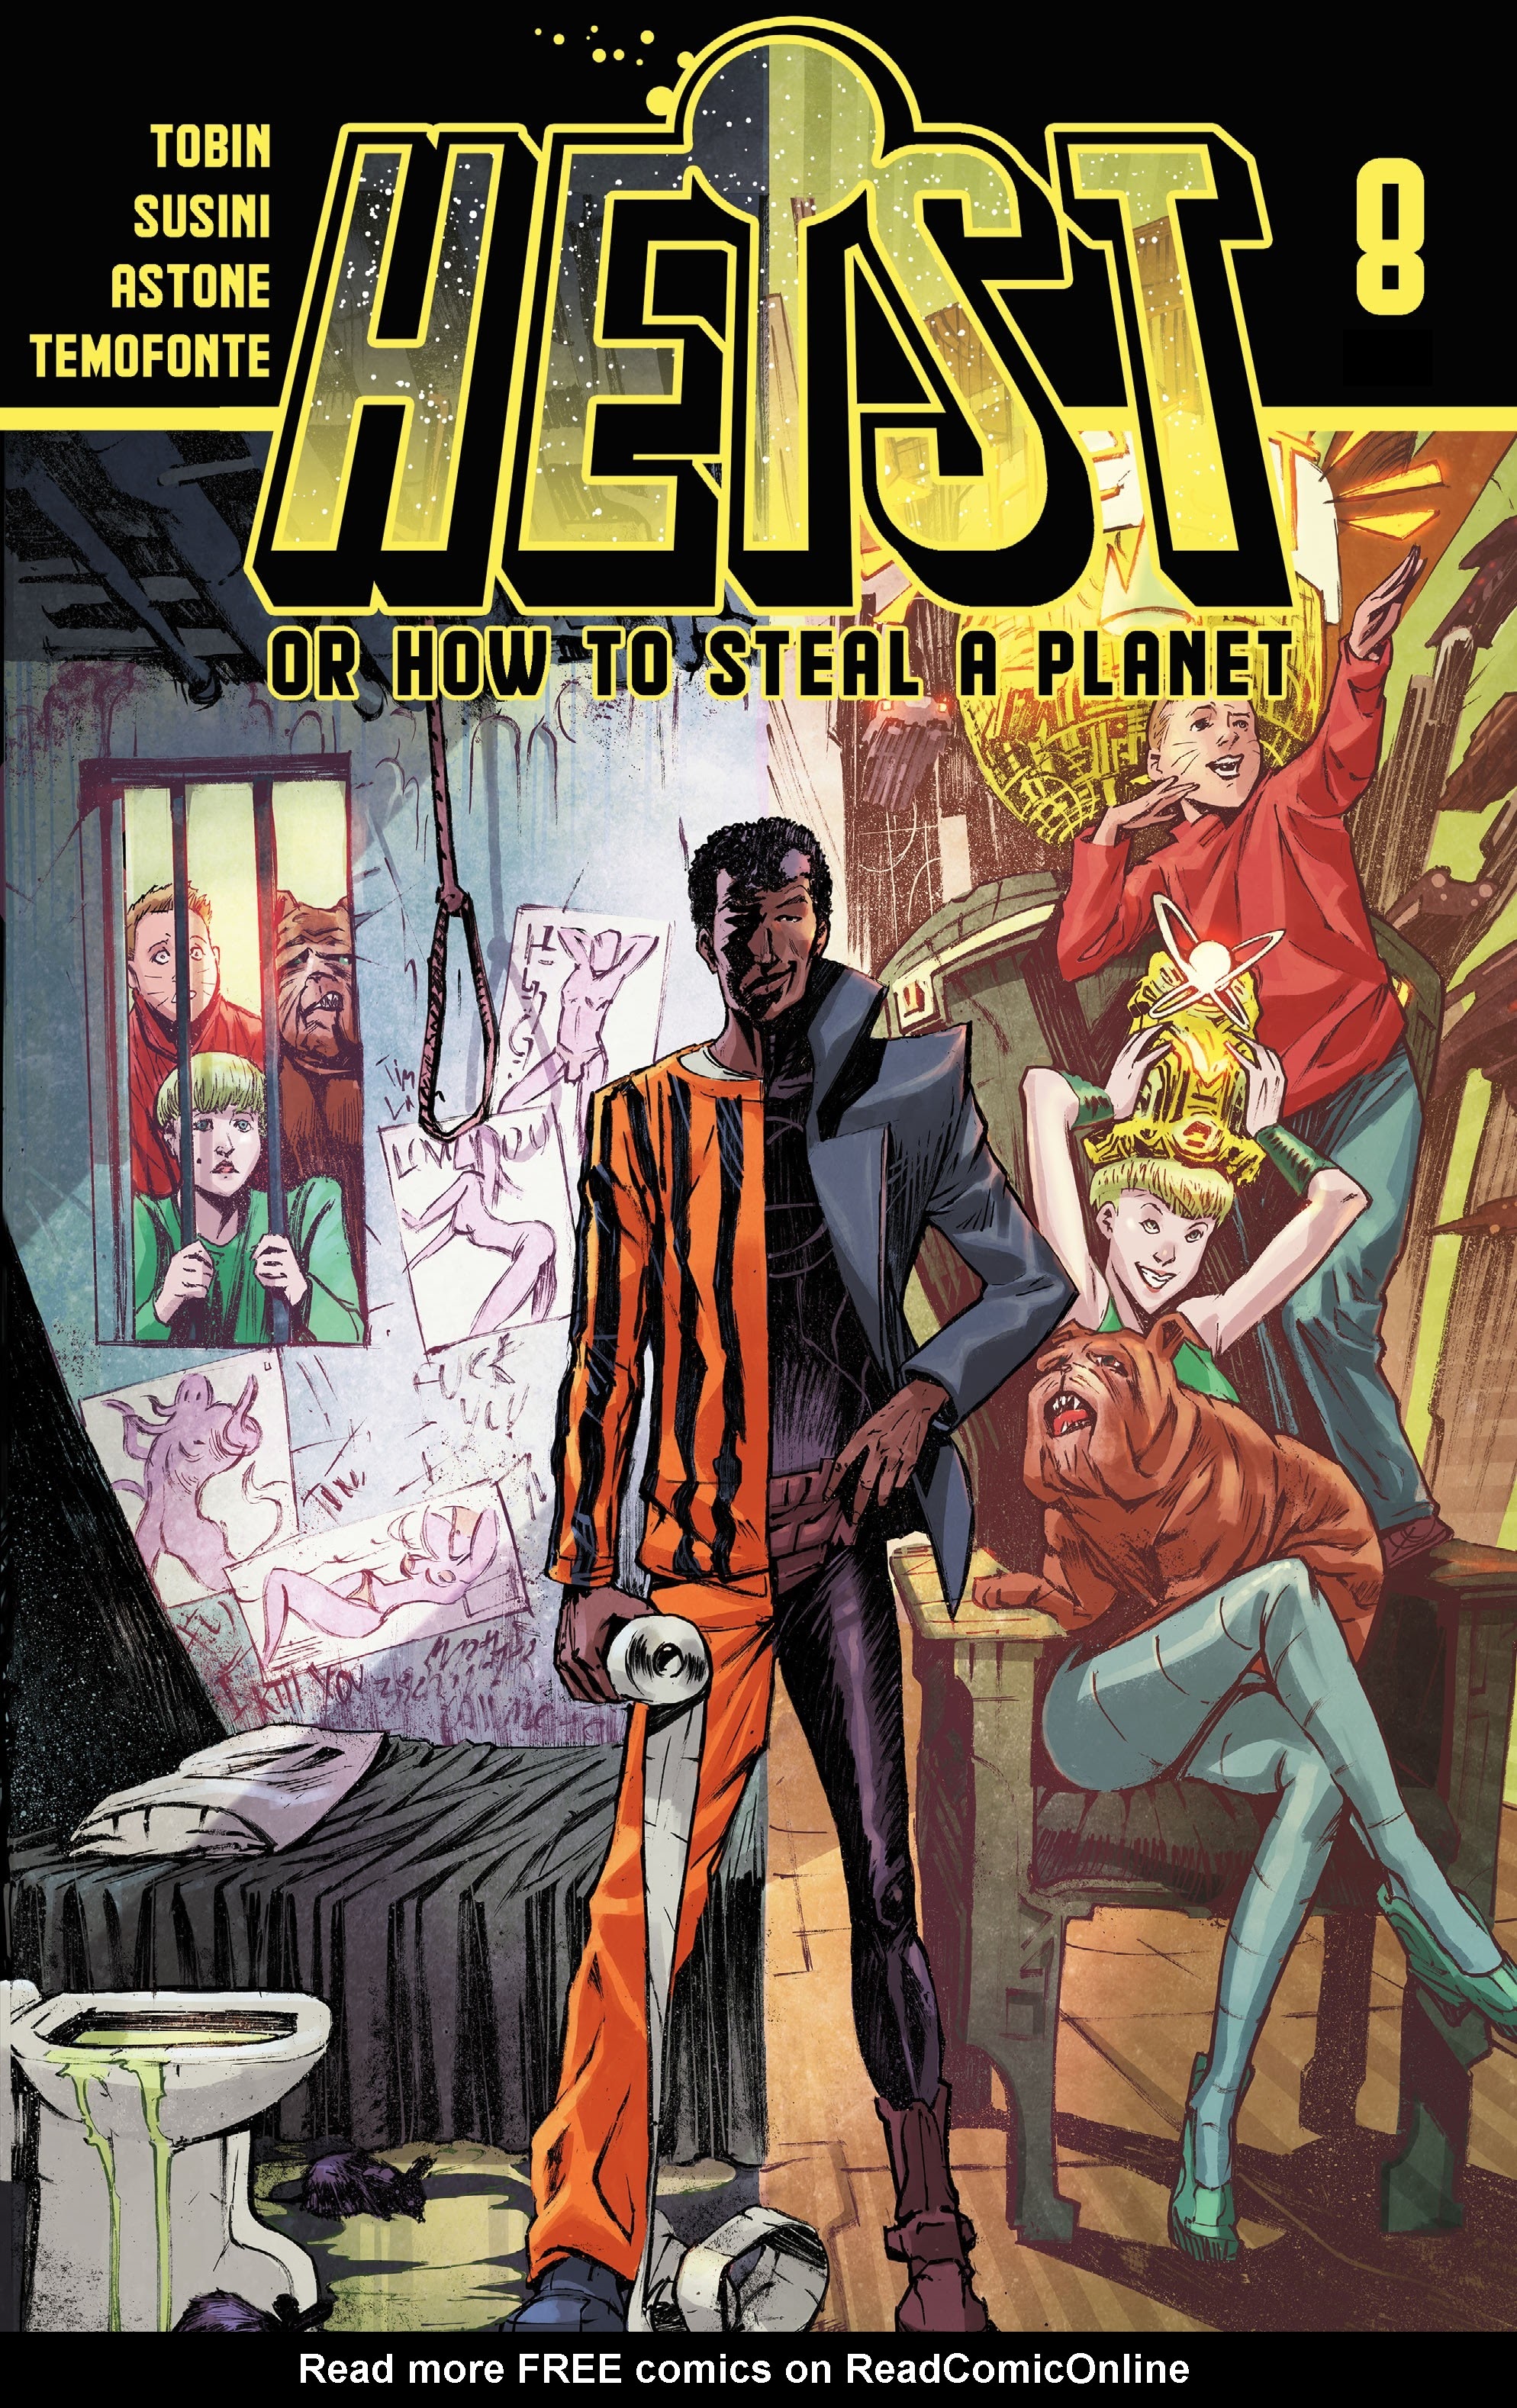 Read online Heist, Or How to Steal A Planet comic -  Issue #8 - 1